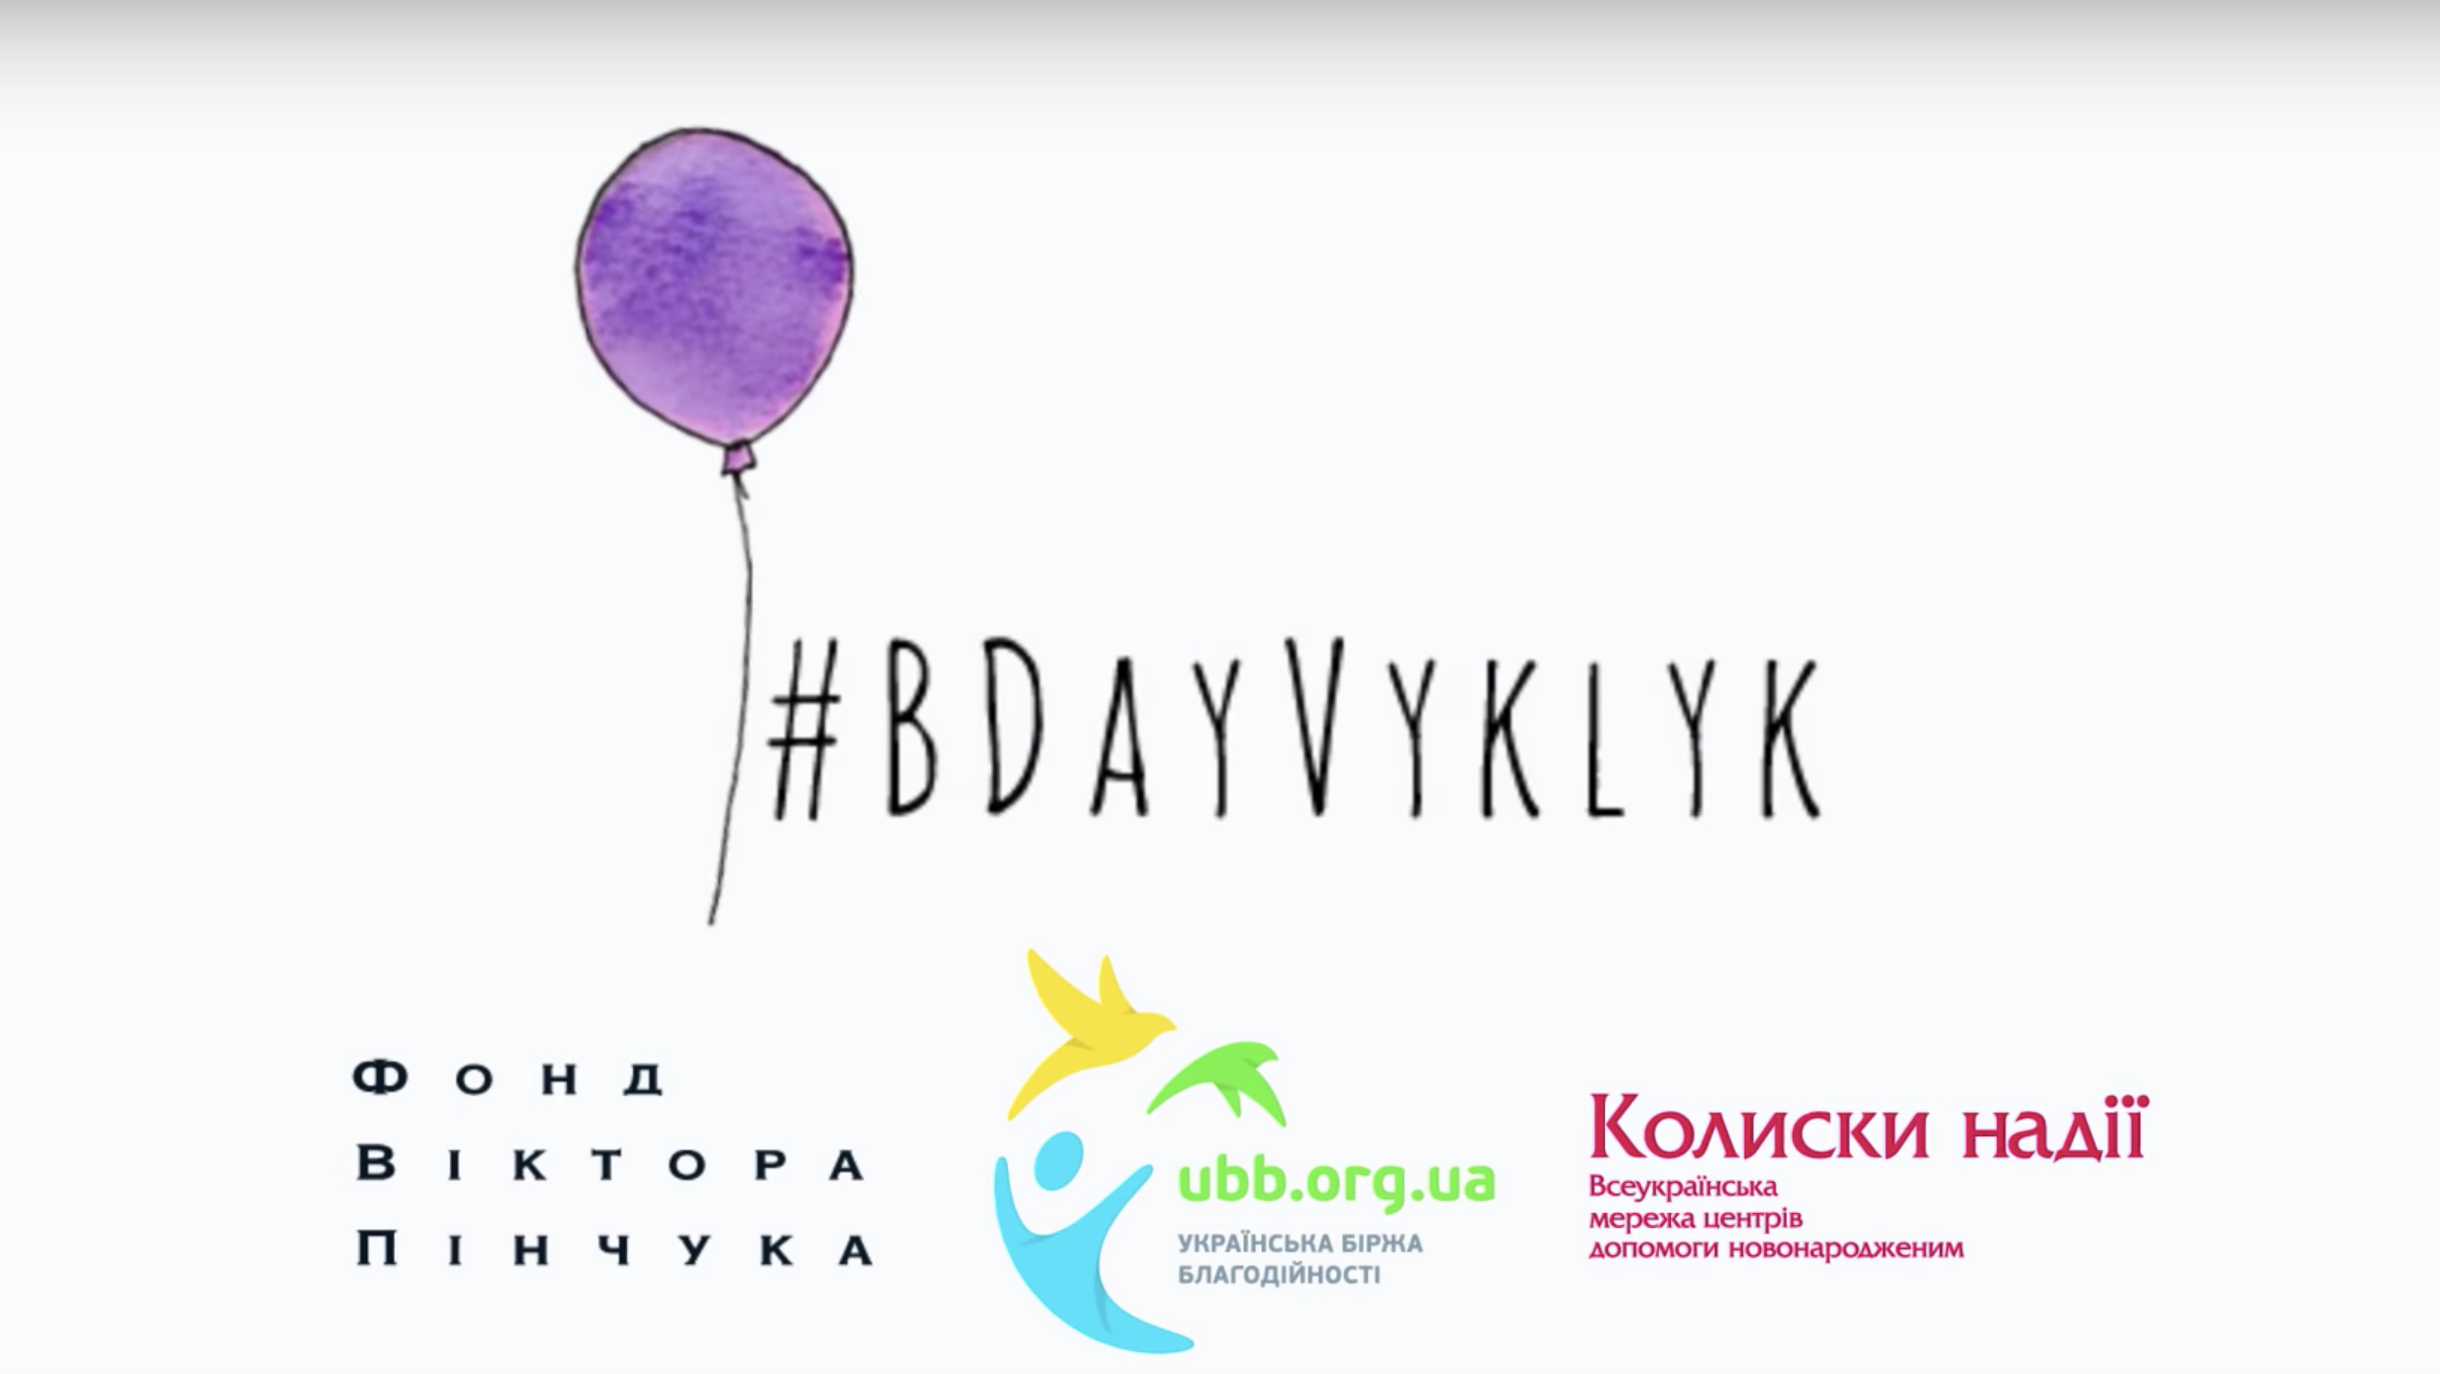 TV-reports about the charity project “BDayVyklyk: first breath”